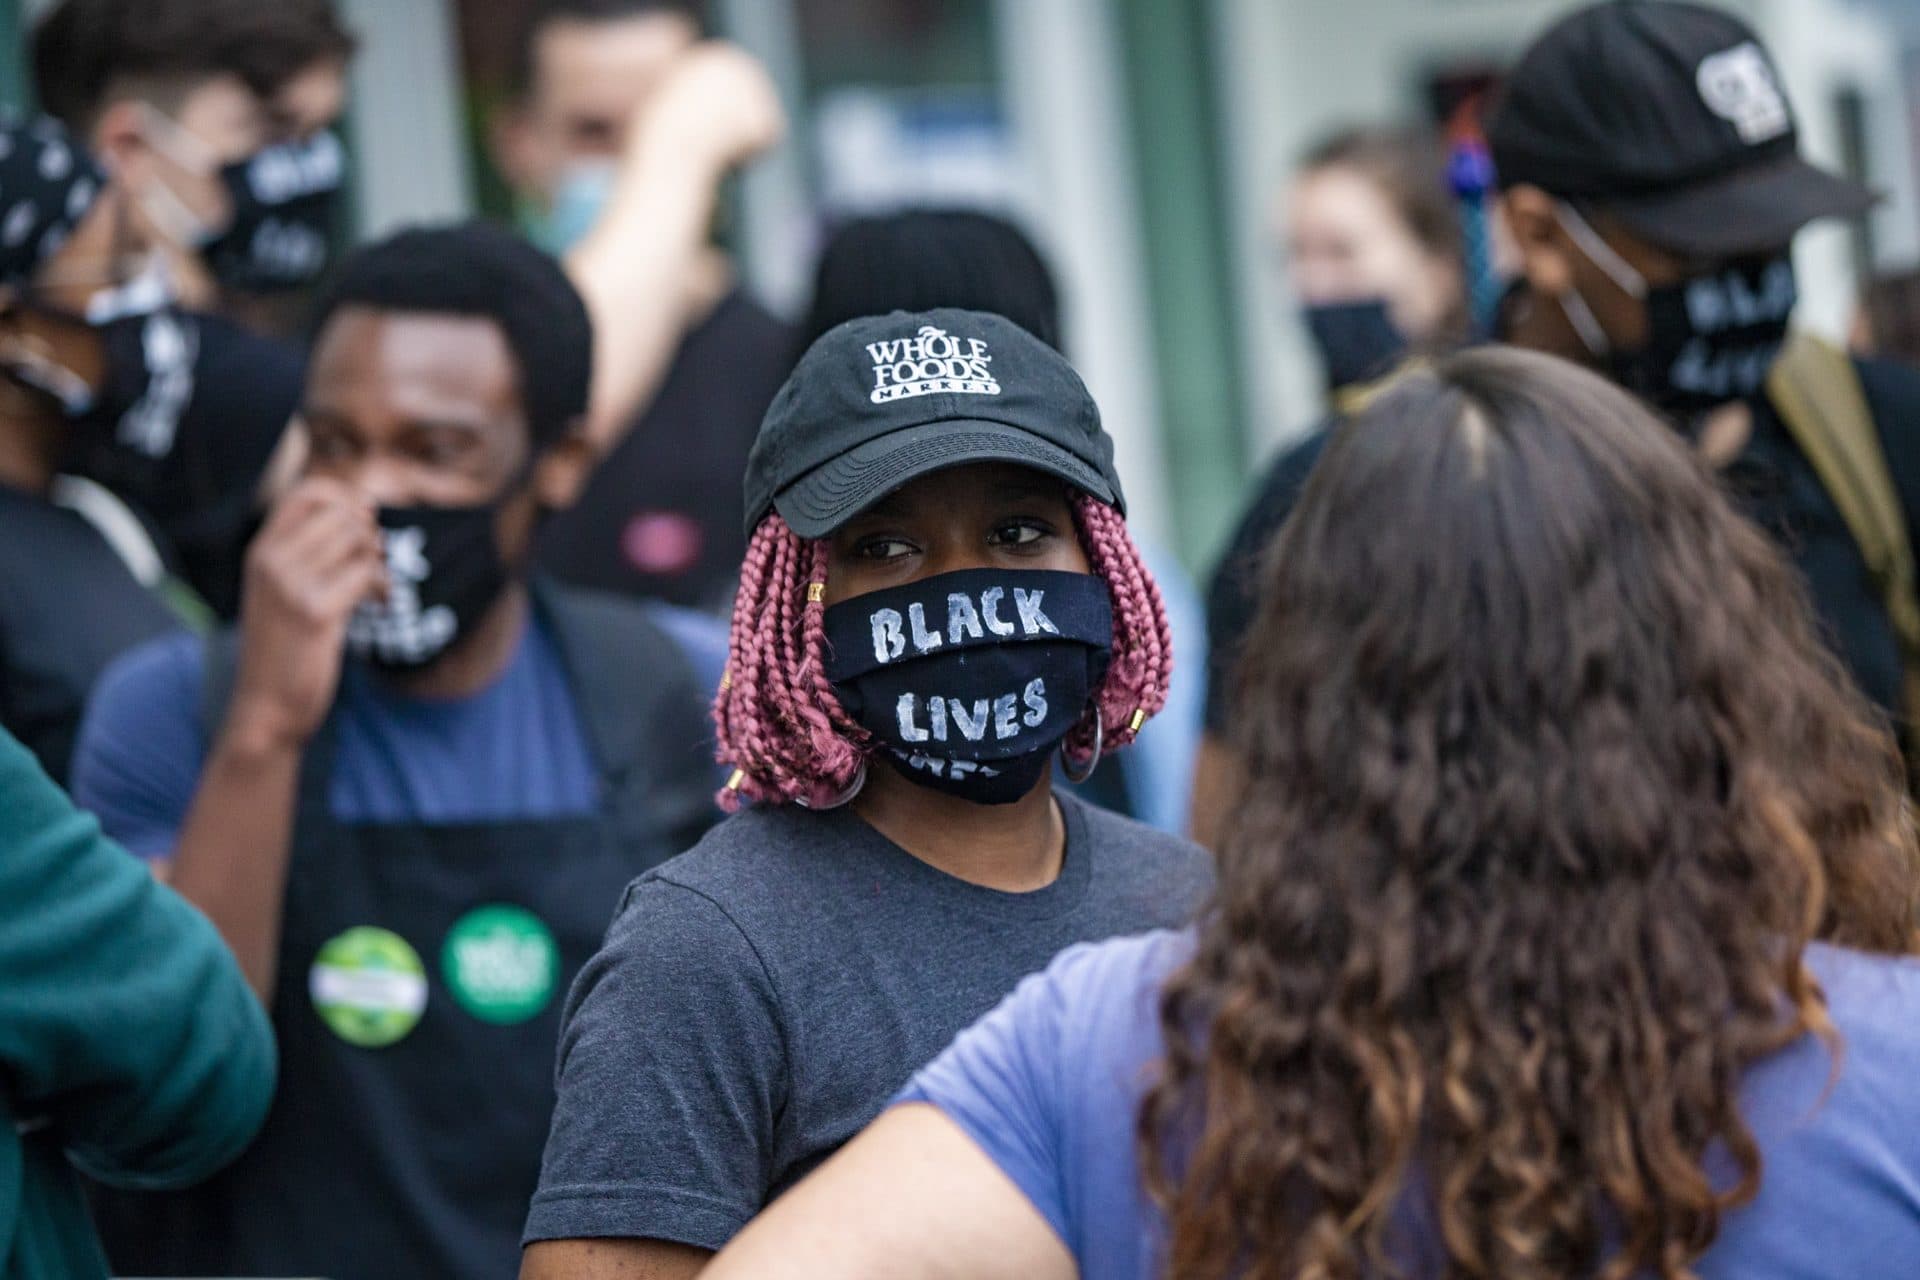 A group of Whole Foods employees dismissed by managers for wearing Black Lives Matter masks during their shifts gather outside of the Whole Foods on River Street in Cambridge. (Jesse Costa/WBUR)